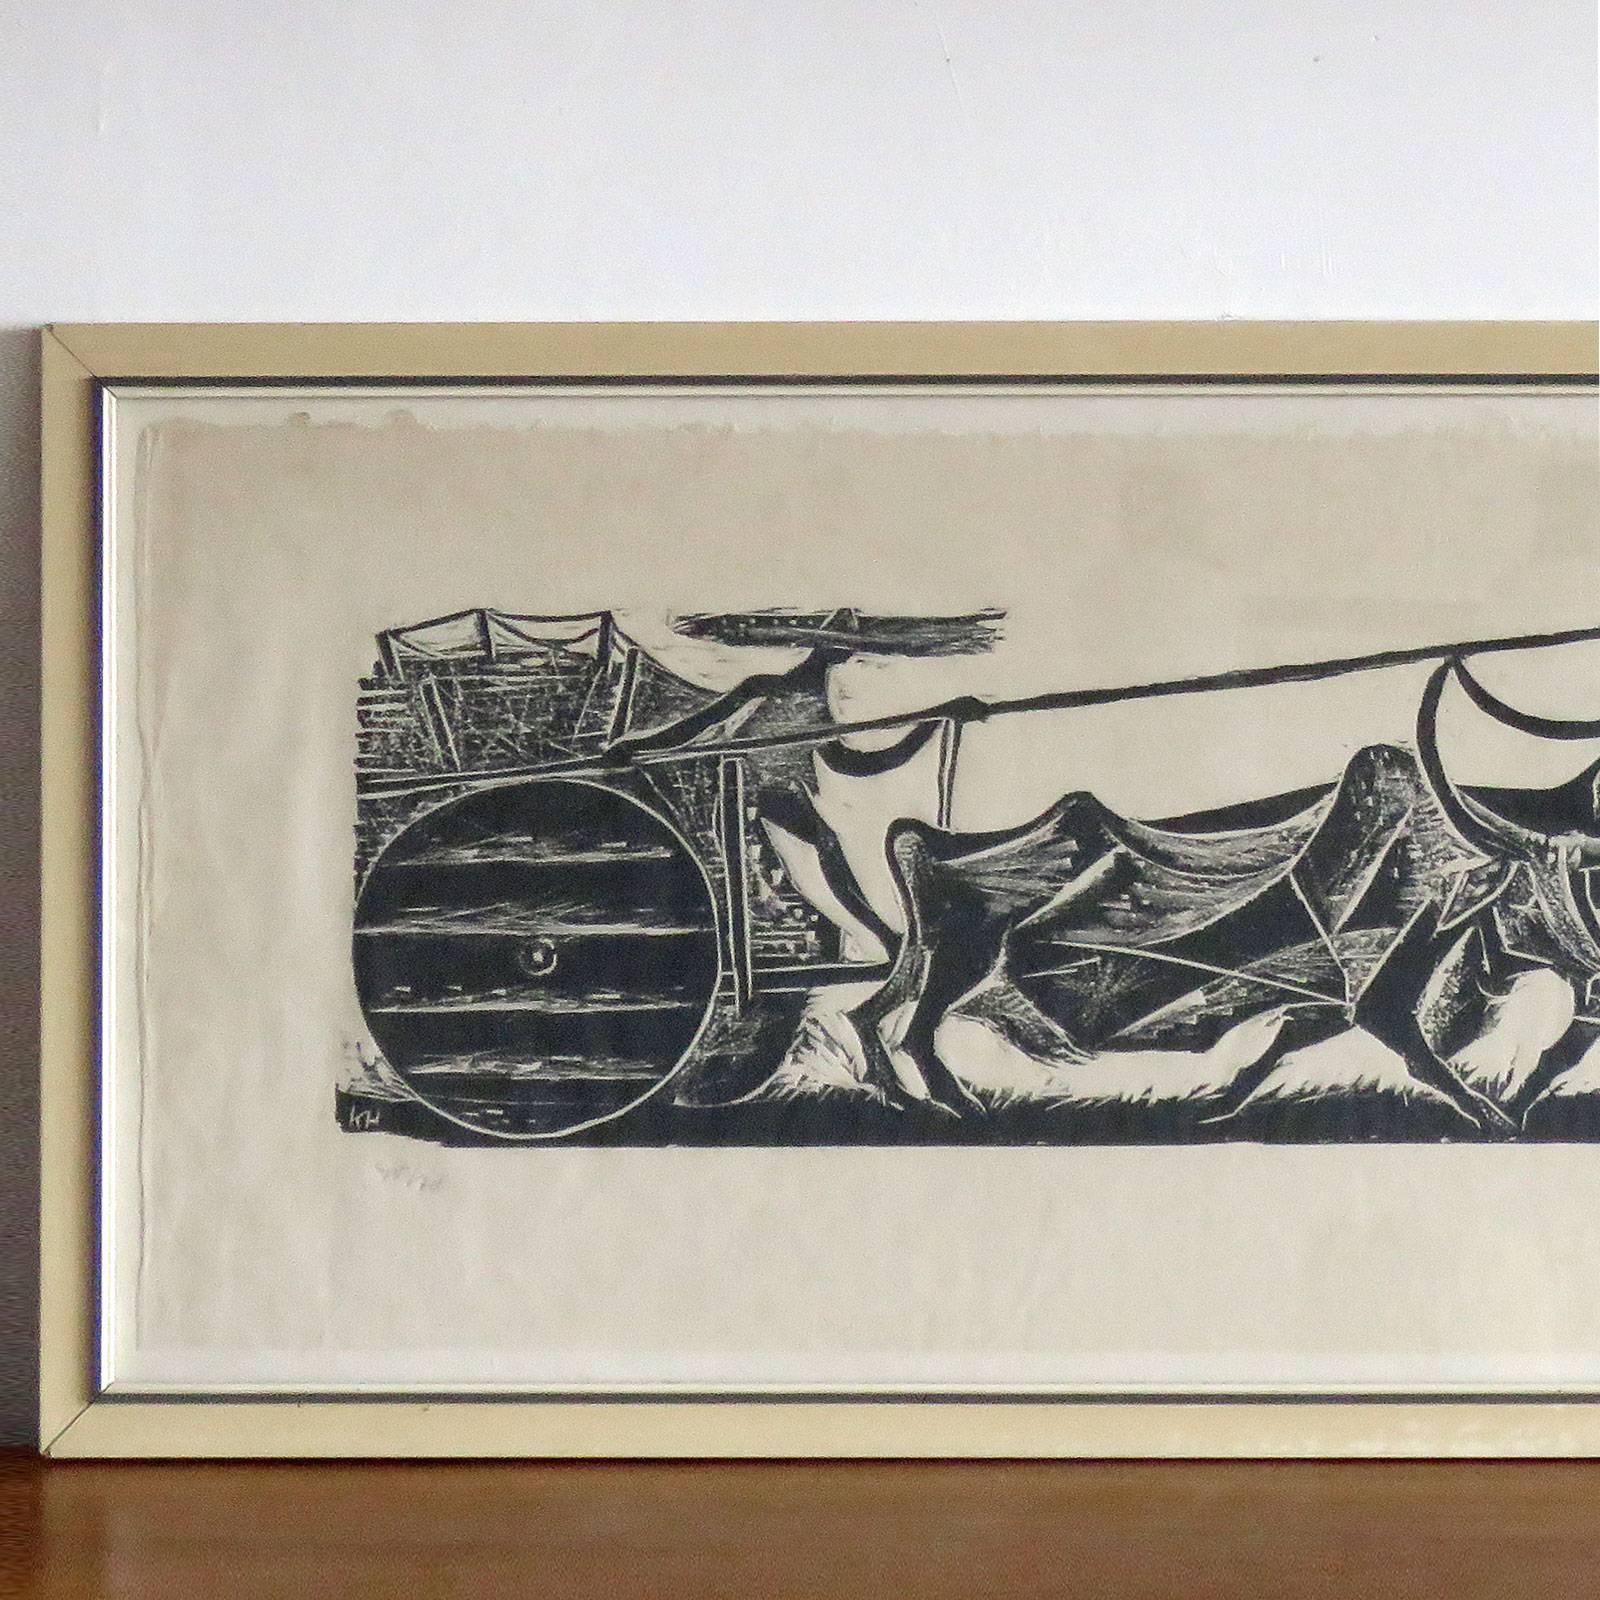 wonderful wood cut print 'Big Team of Oxen' by Karl Heinz Hansen-Bahia, 1959, framed behind glass, print size 12.25 in x 37.75 in, frame size 15 in x 40.5 in, ed. 40/70, signed and dated.